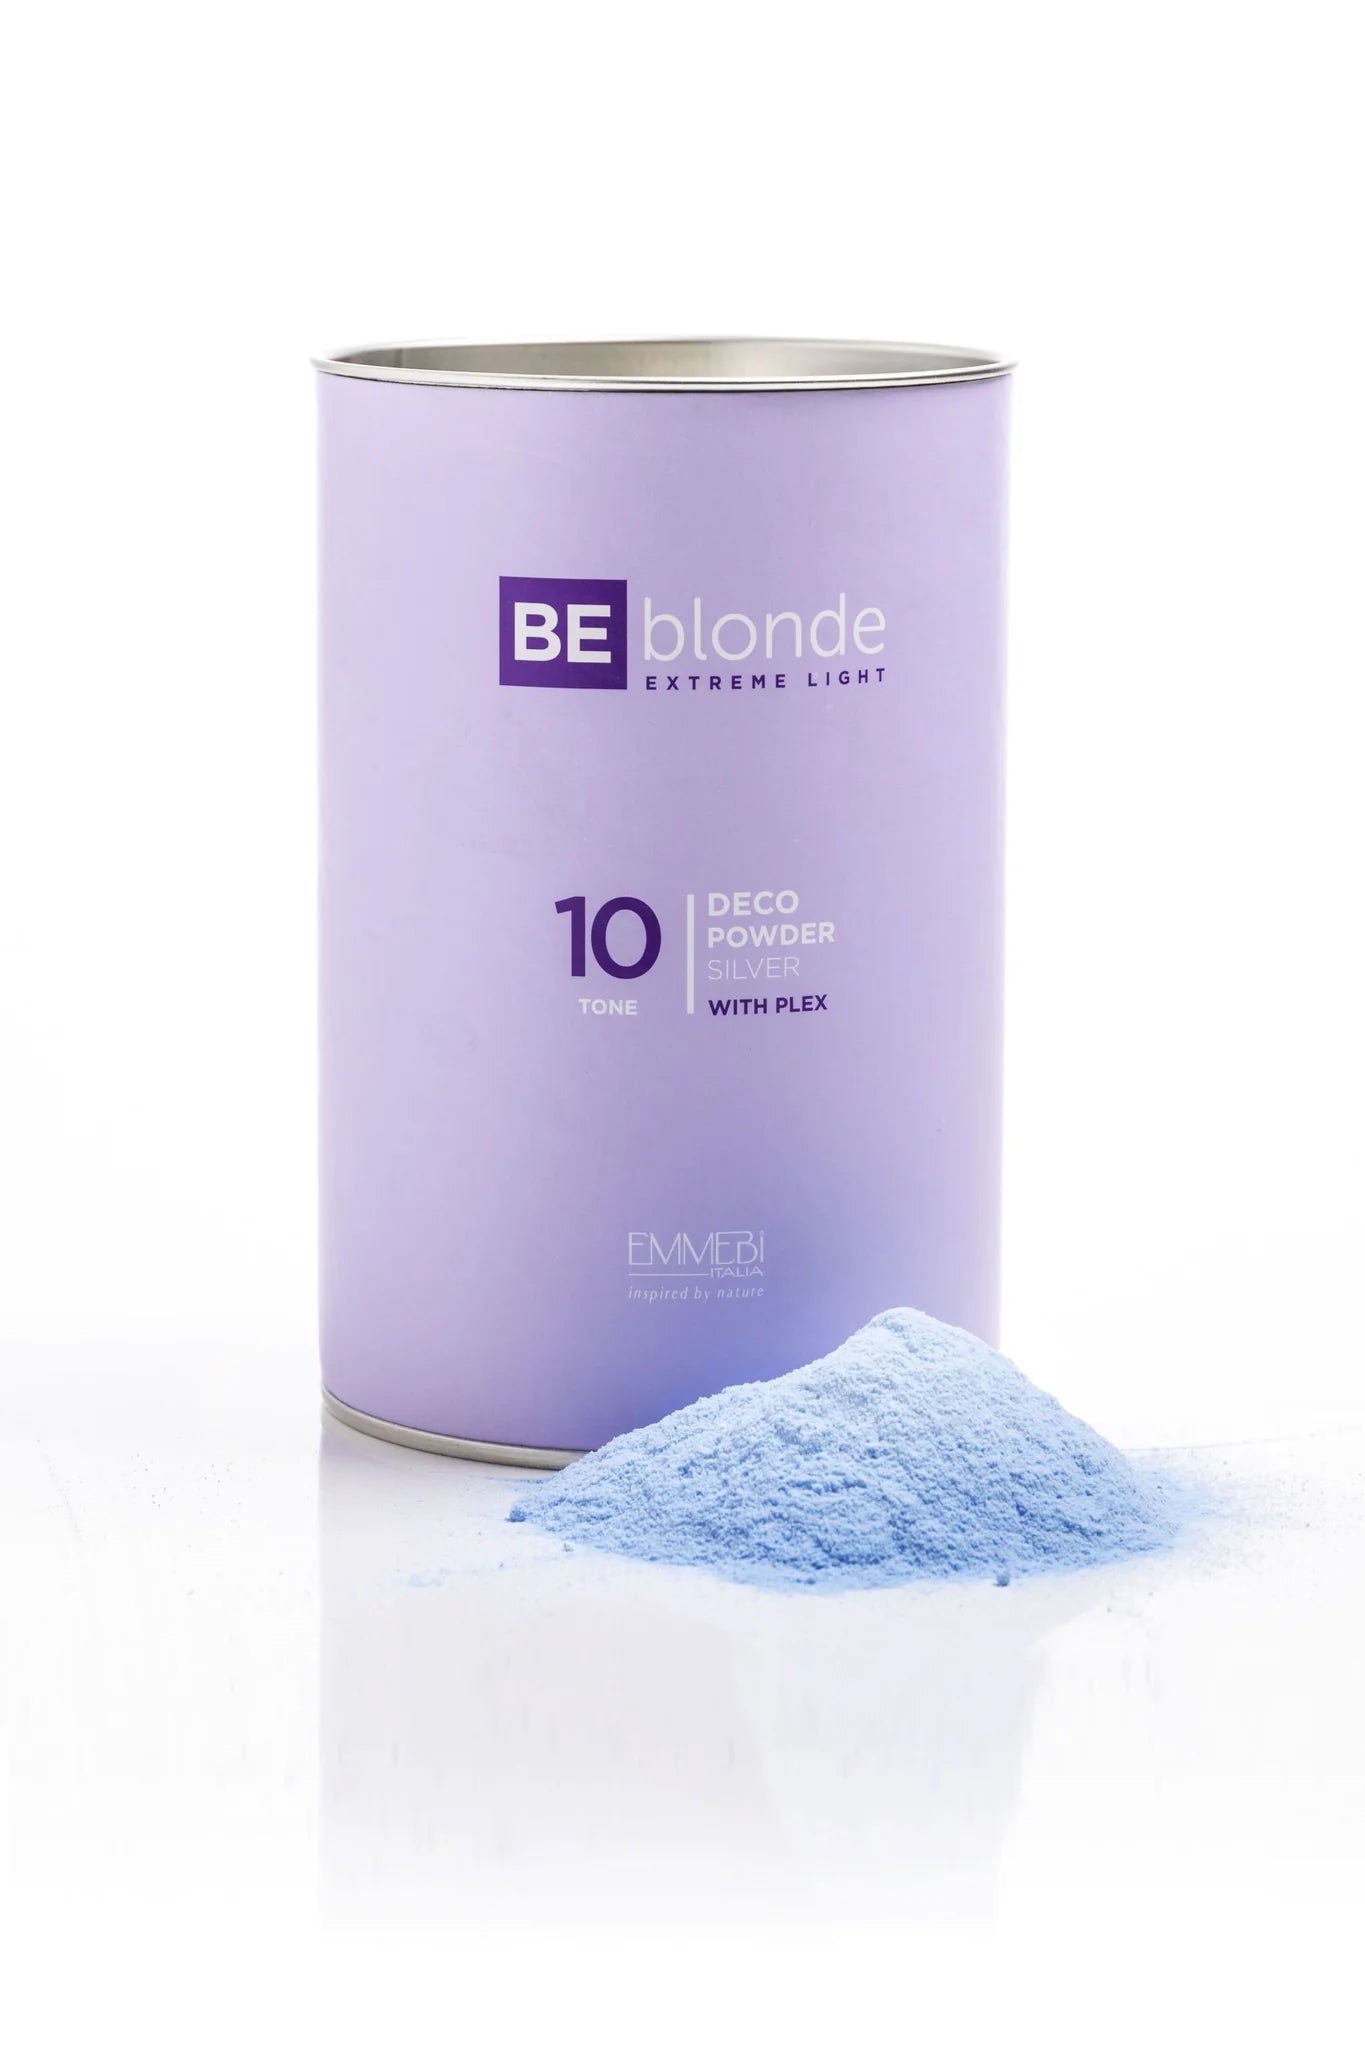 BE BLONDE DECO POWDER SILVER 10 500g